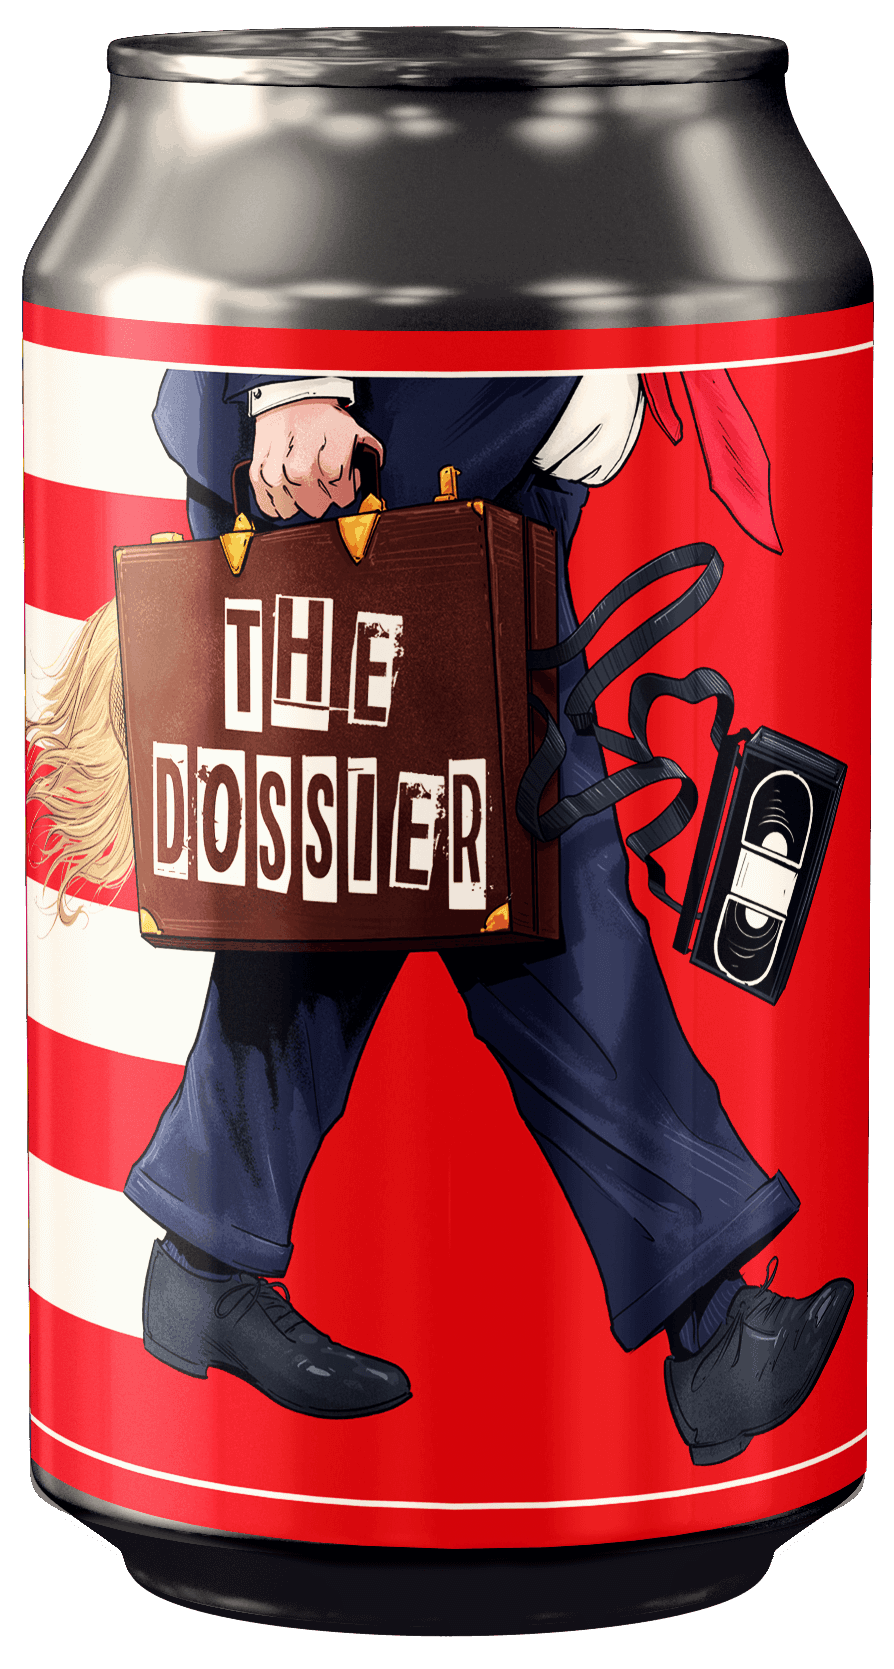 The Dossier can